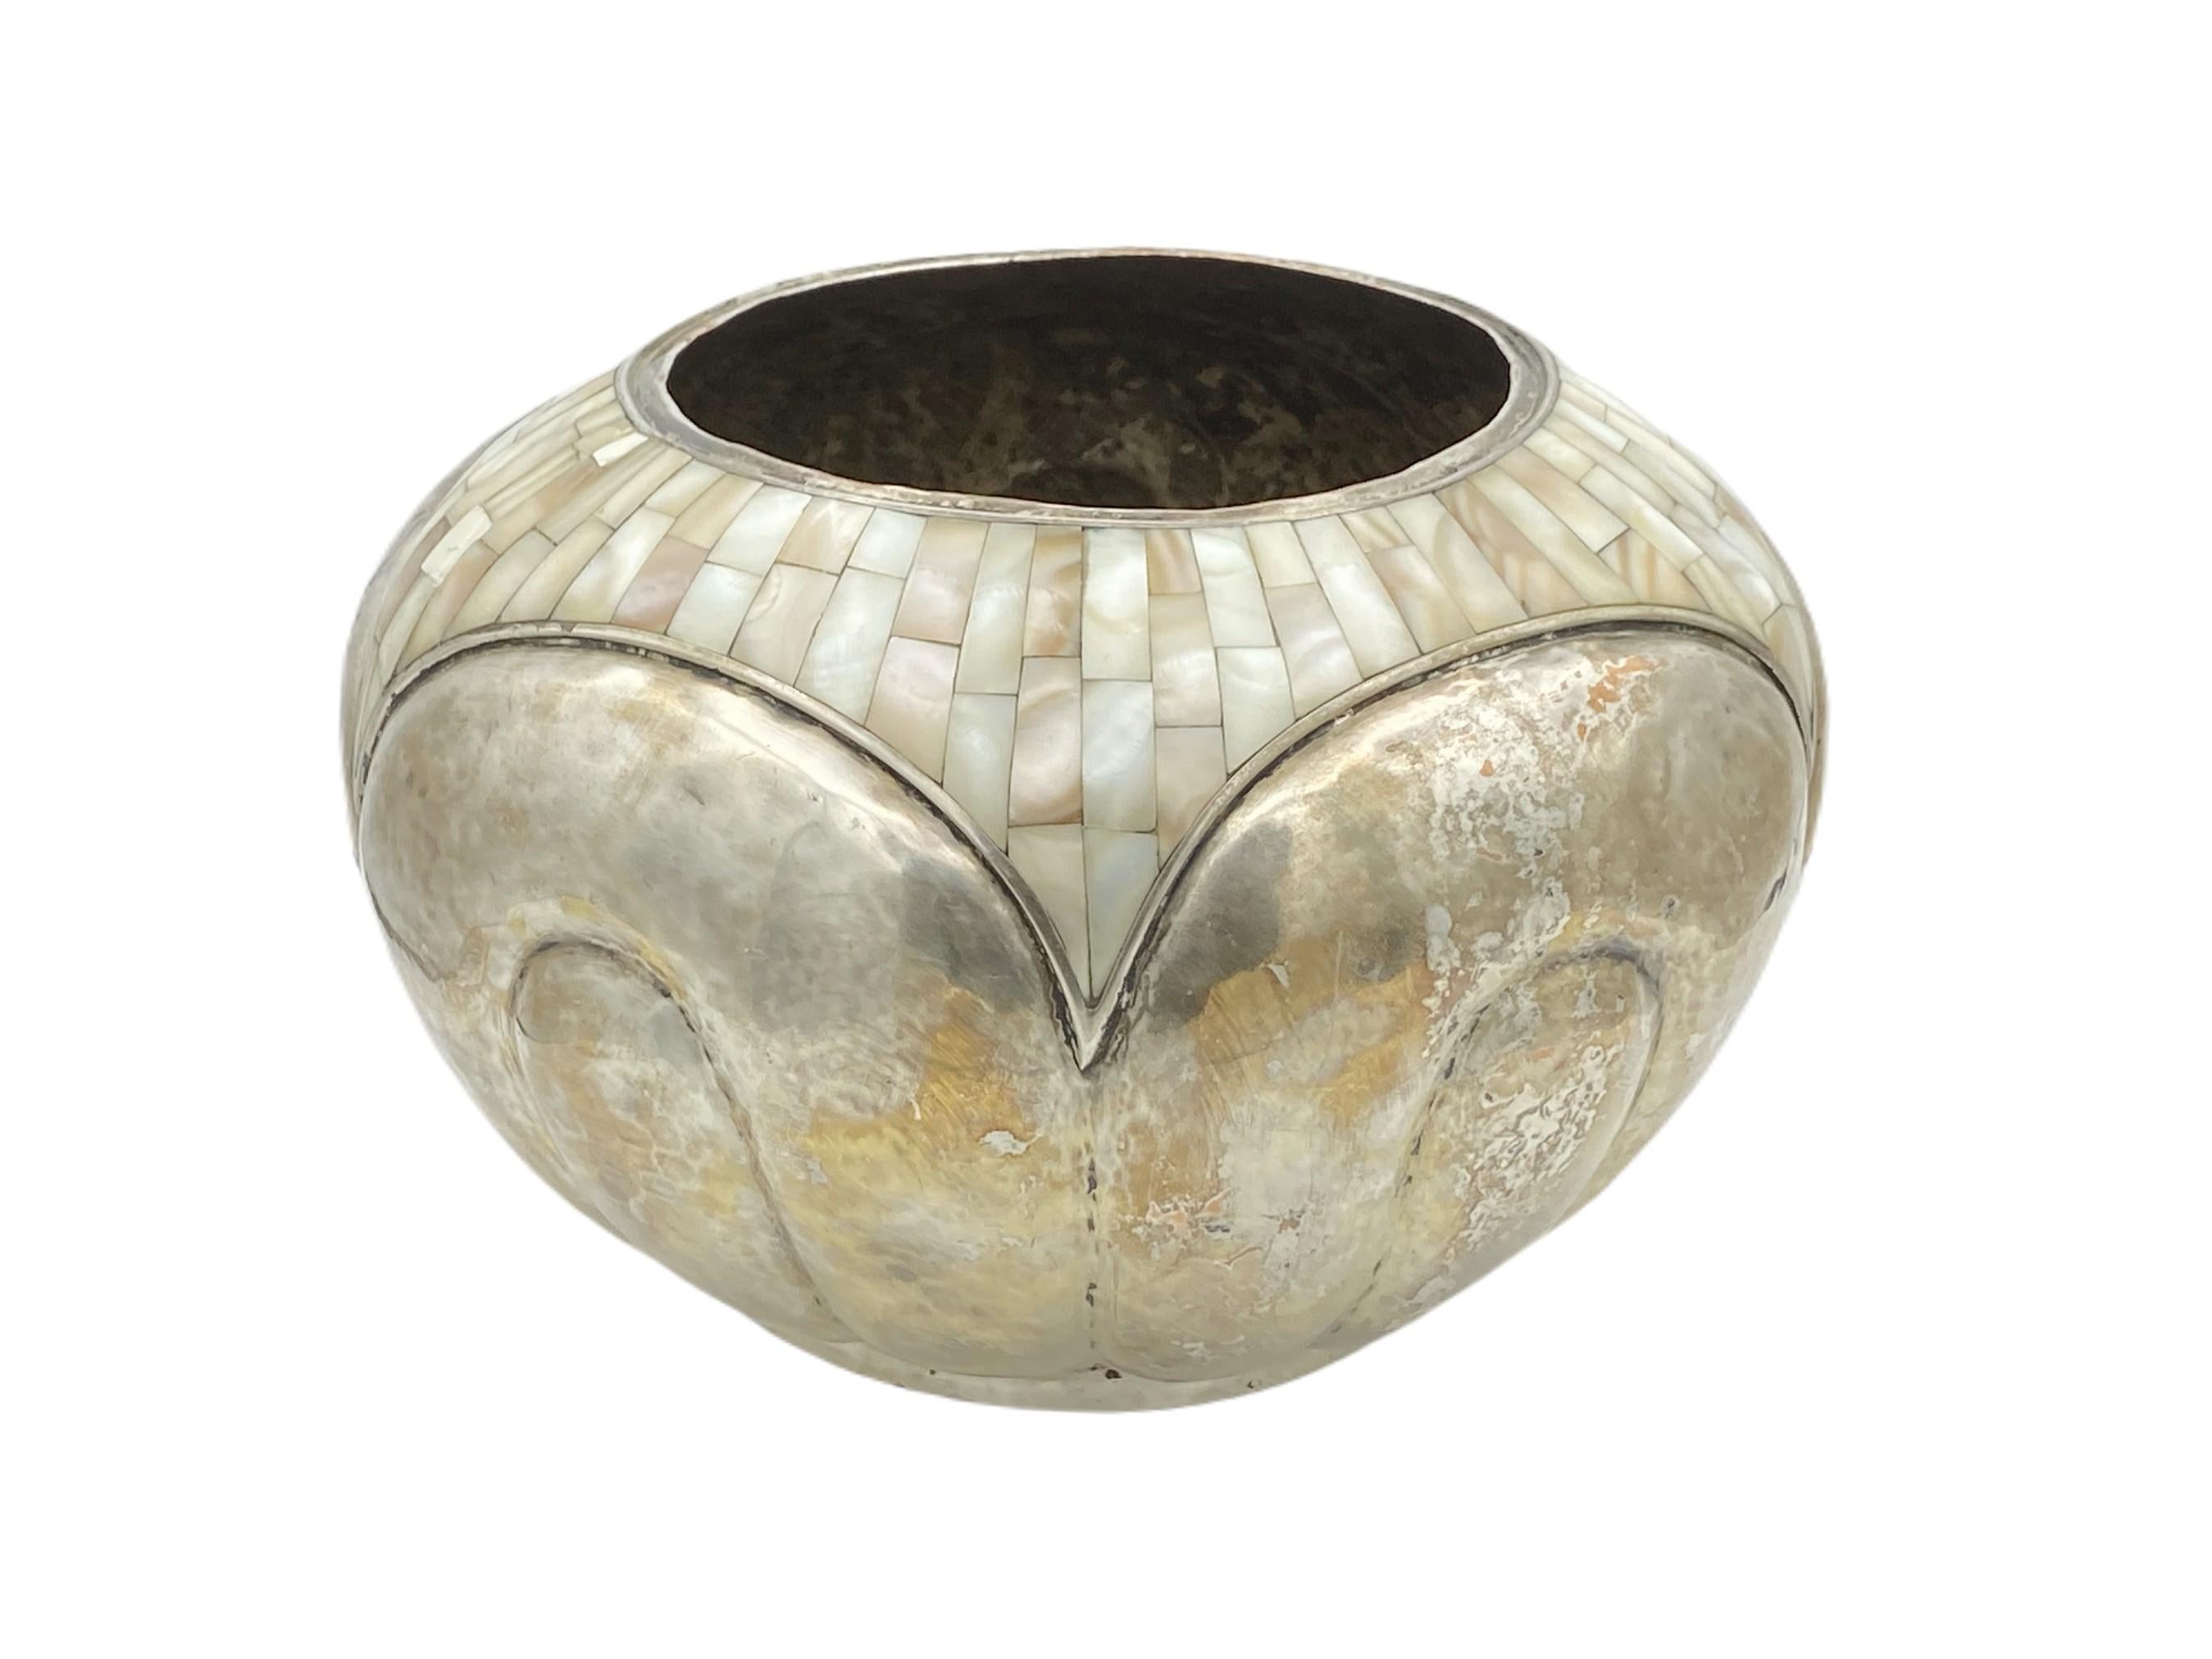 Experience timeless beauty with this exquisite Los Castillo handwrought silver plate hammered vase, featuring an intricate inset Mother of Pearl mosaic. Handwrought, this striking piece will captivate admirers with its eye-catching design and